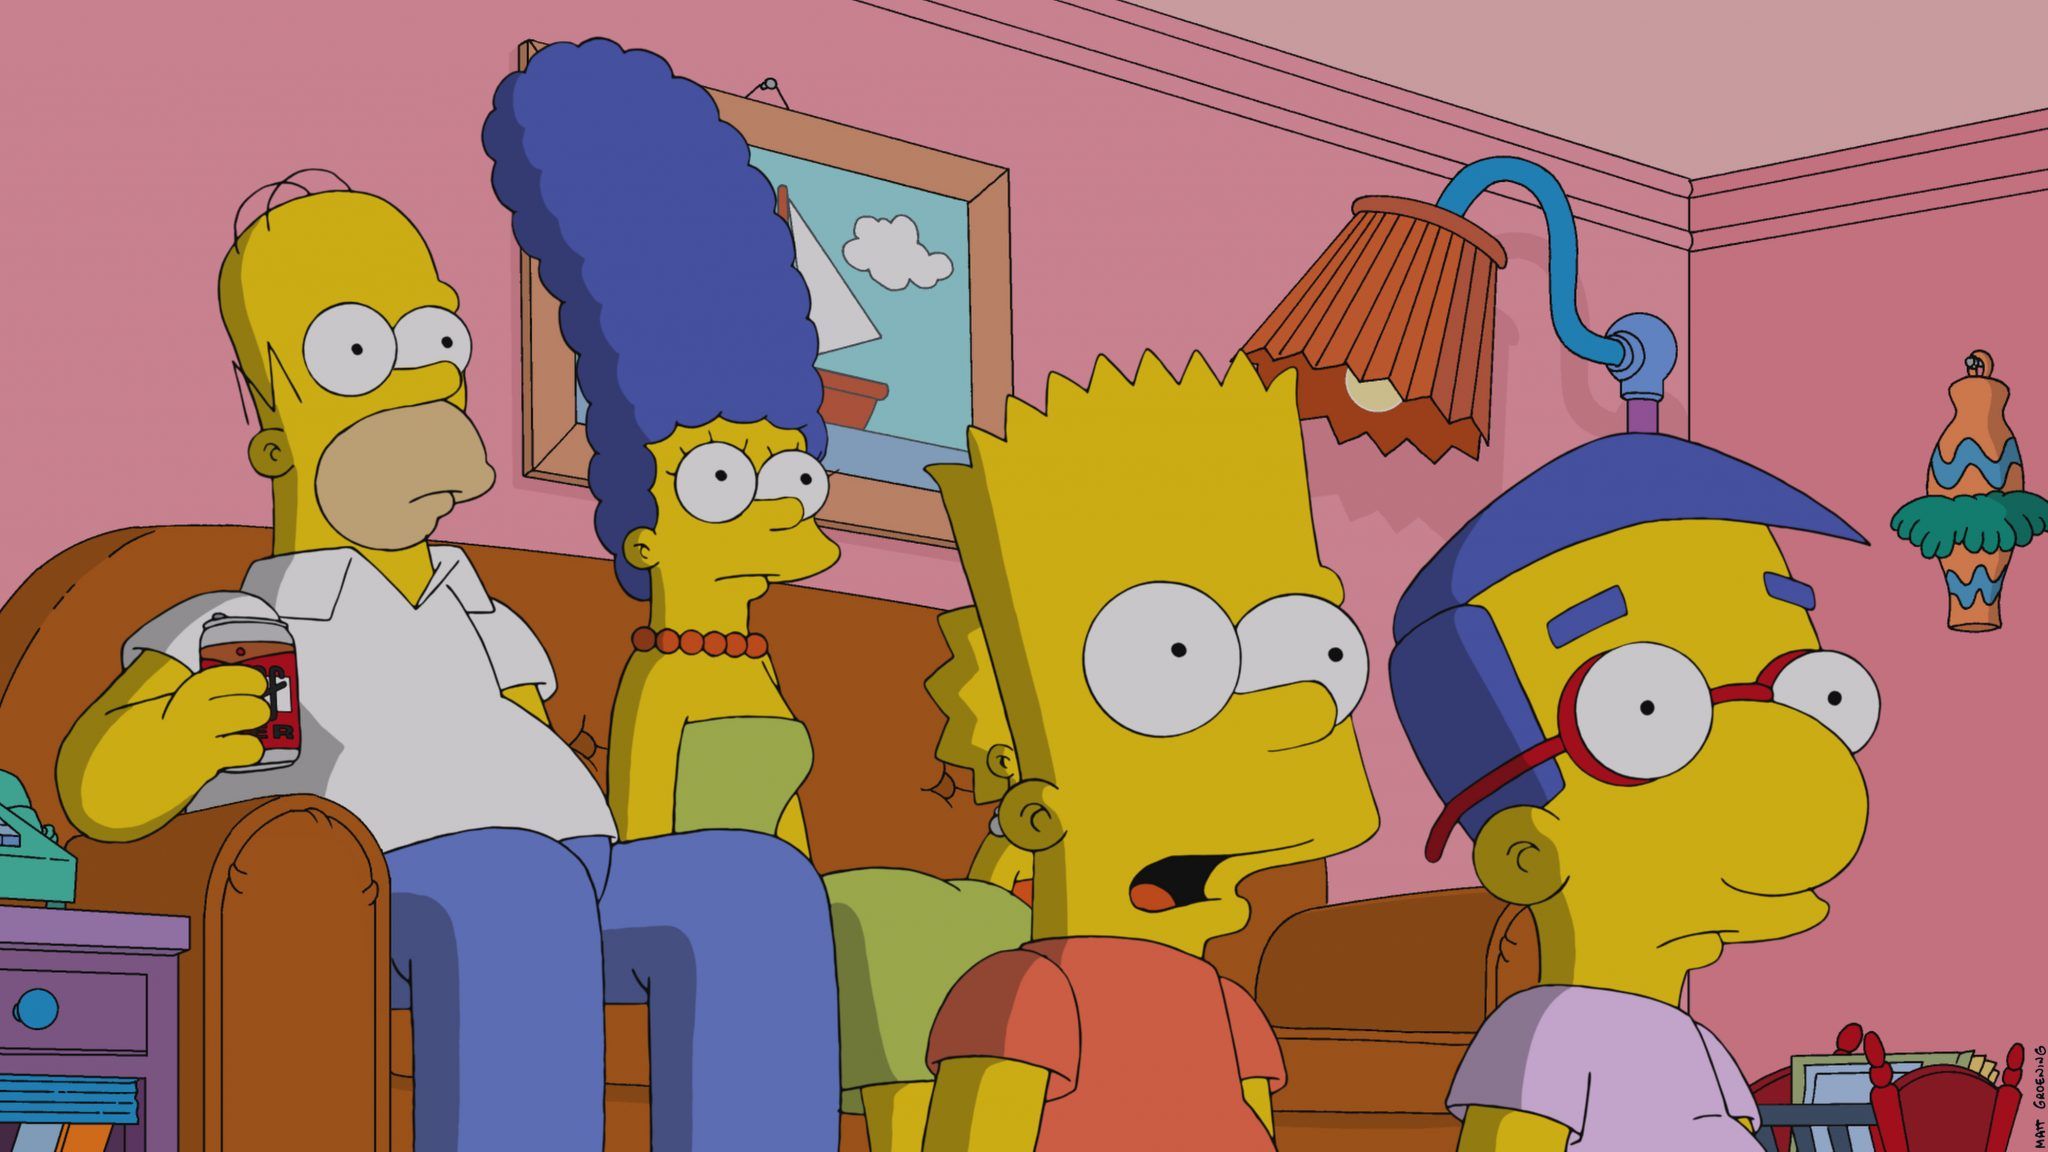 The Simpsons Weirdest & Best Ever Prediction Is 30 Years Old